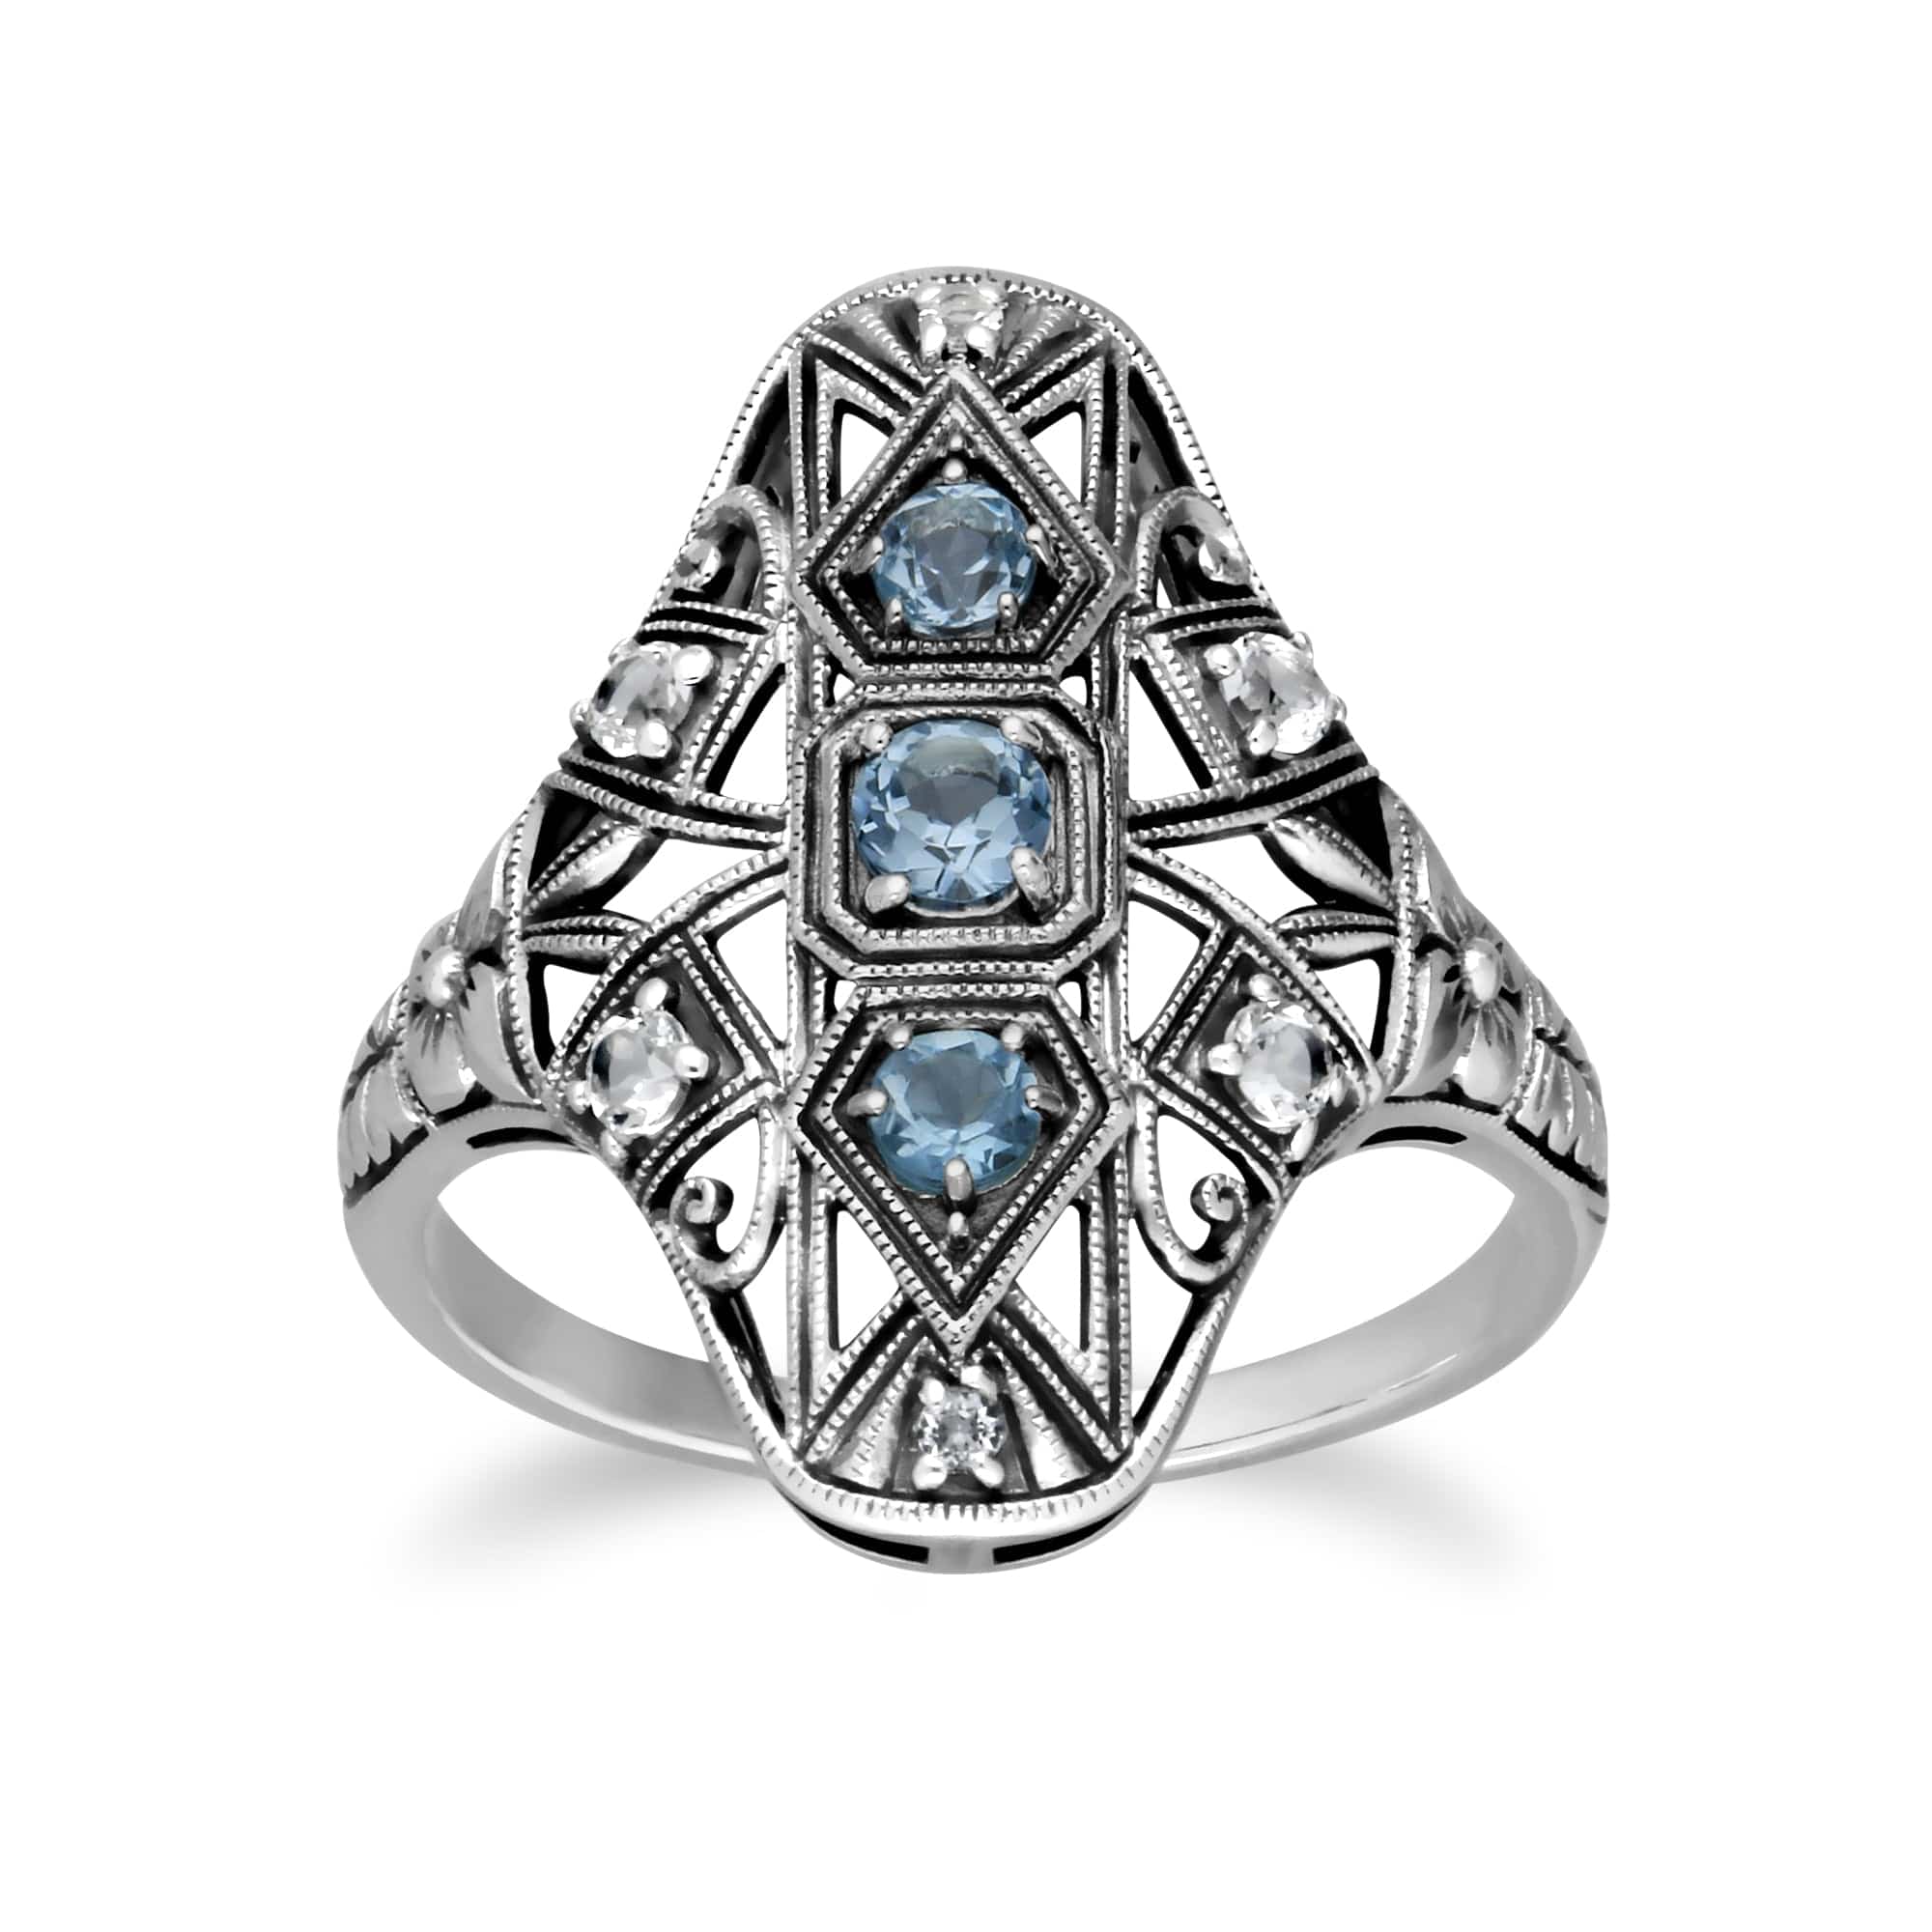 241R210603925 Art Nouveau Style Round Blue & White Topaz Statement Ring in 925 Sterling Silver 1